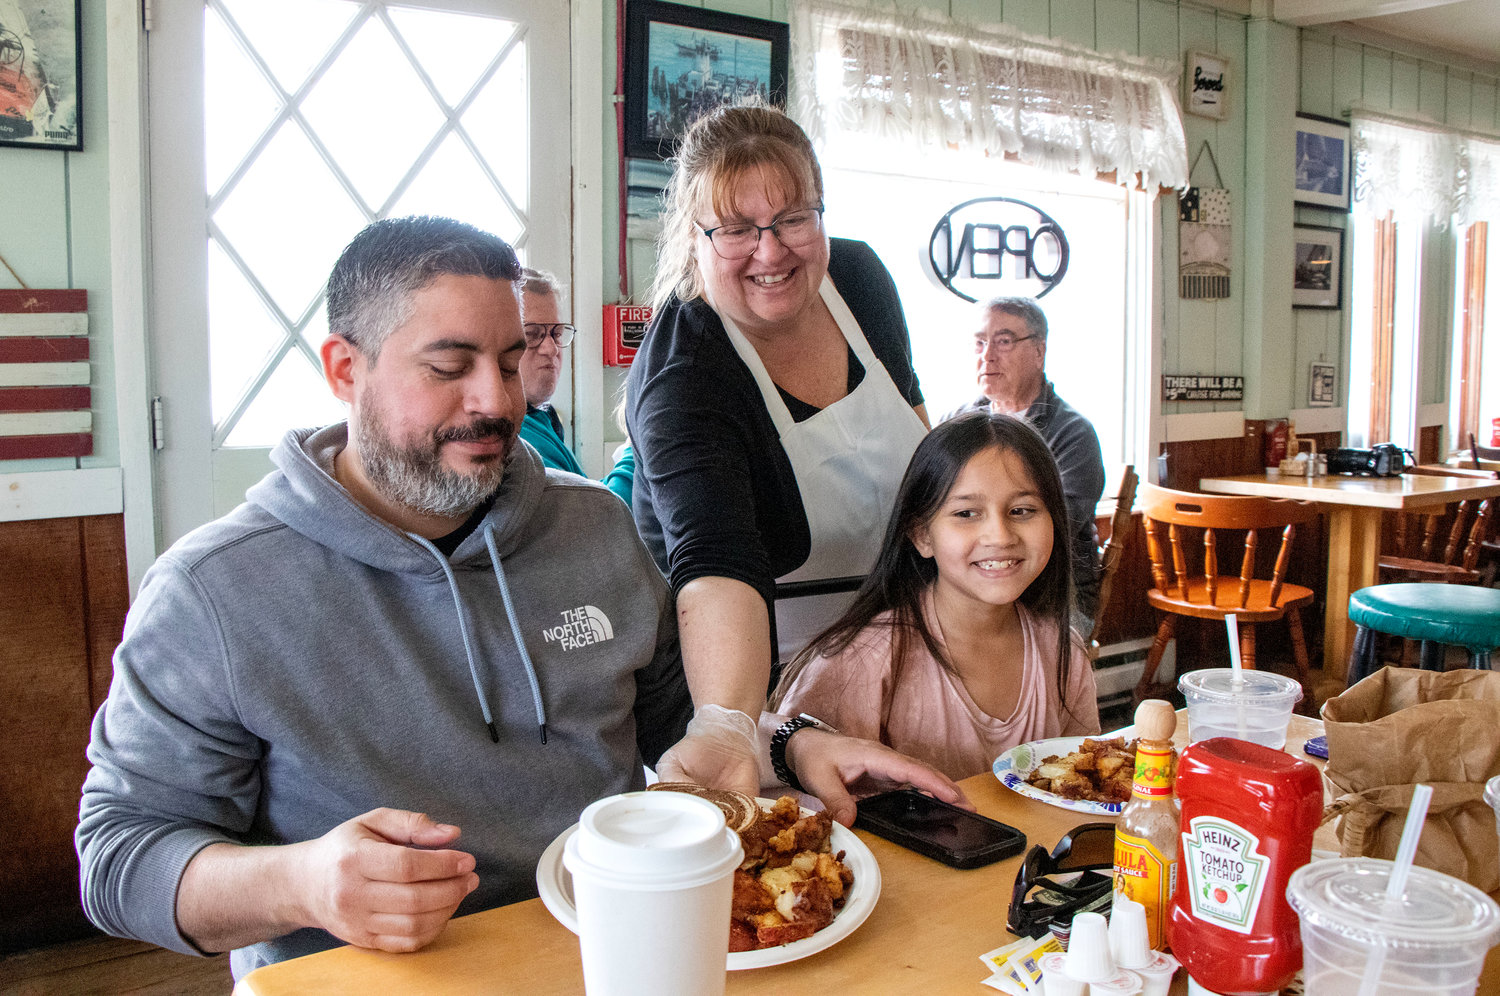 Cindy Morse serves breakfast to Adam Holguin and his daughter Aubrey, 9, on Friday morning, the day before she closed her restaurant, Cindy’s Country Cafe. (Isabella Holquin, 13, is out of frame.)